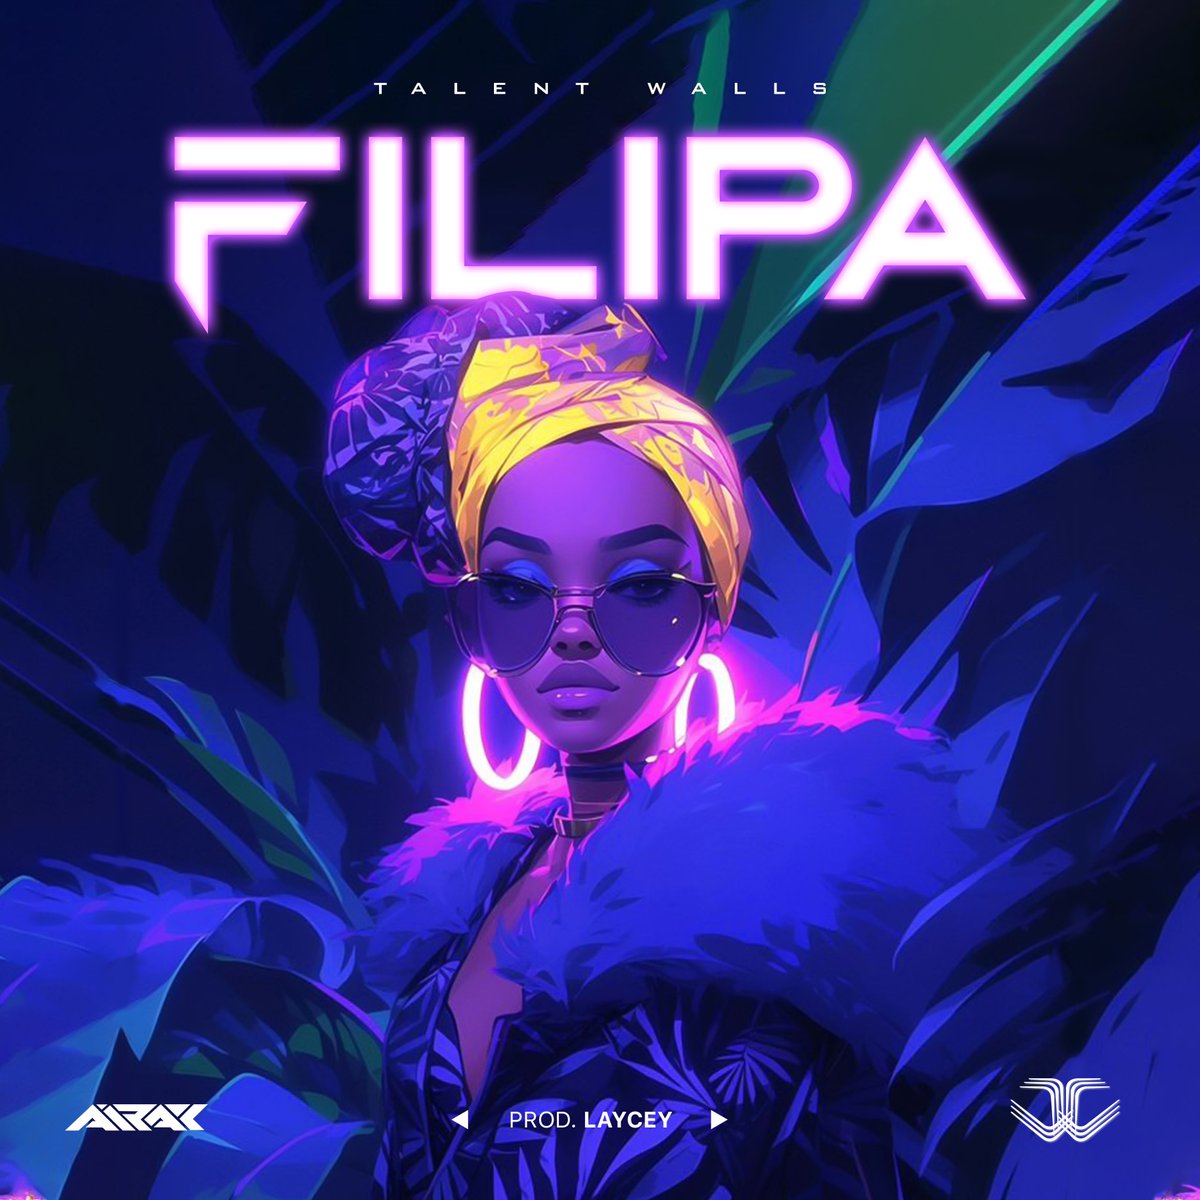 FILIPA OUT NOW EVERYWHERE 🔥🔥 Produced by @TricksLaycee Mixed and mastered by @ledra426 Performed by @iamairak open.spotify.com/album/7m0P0wpQ…